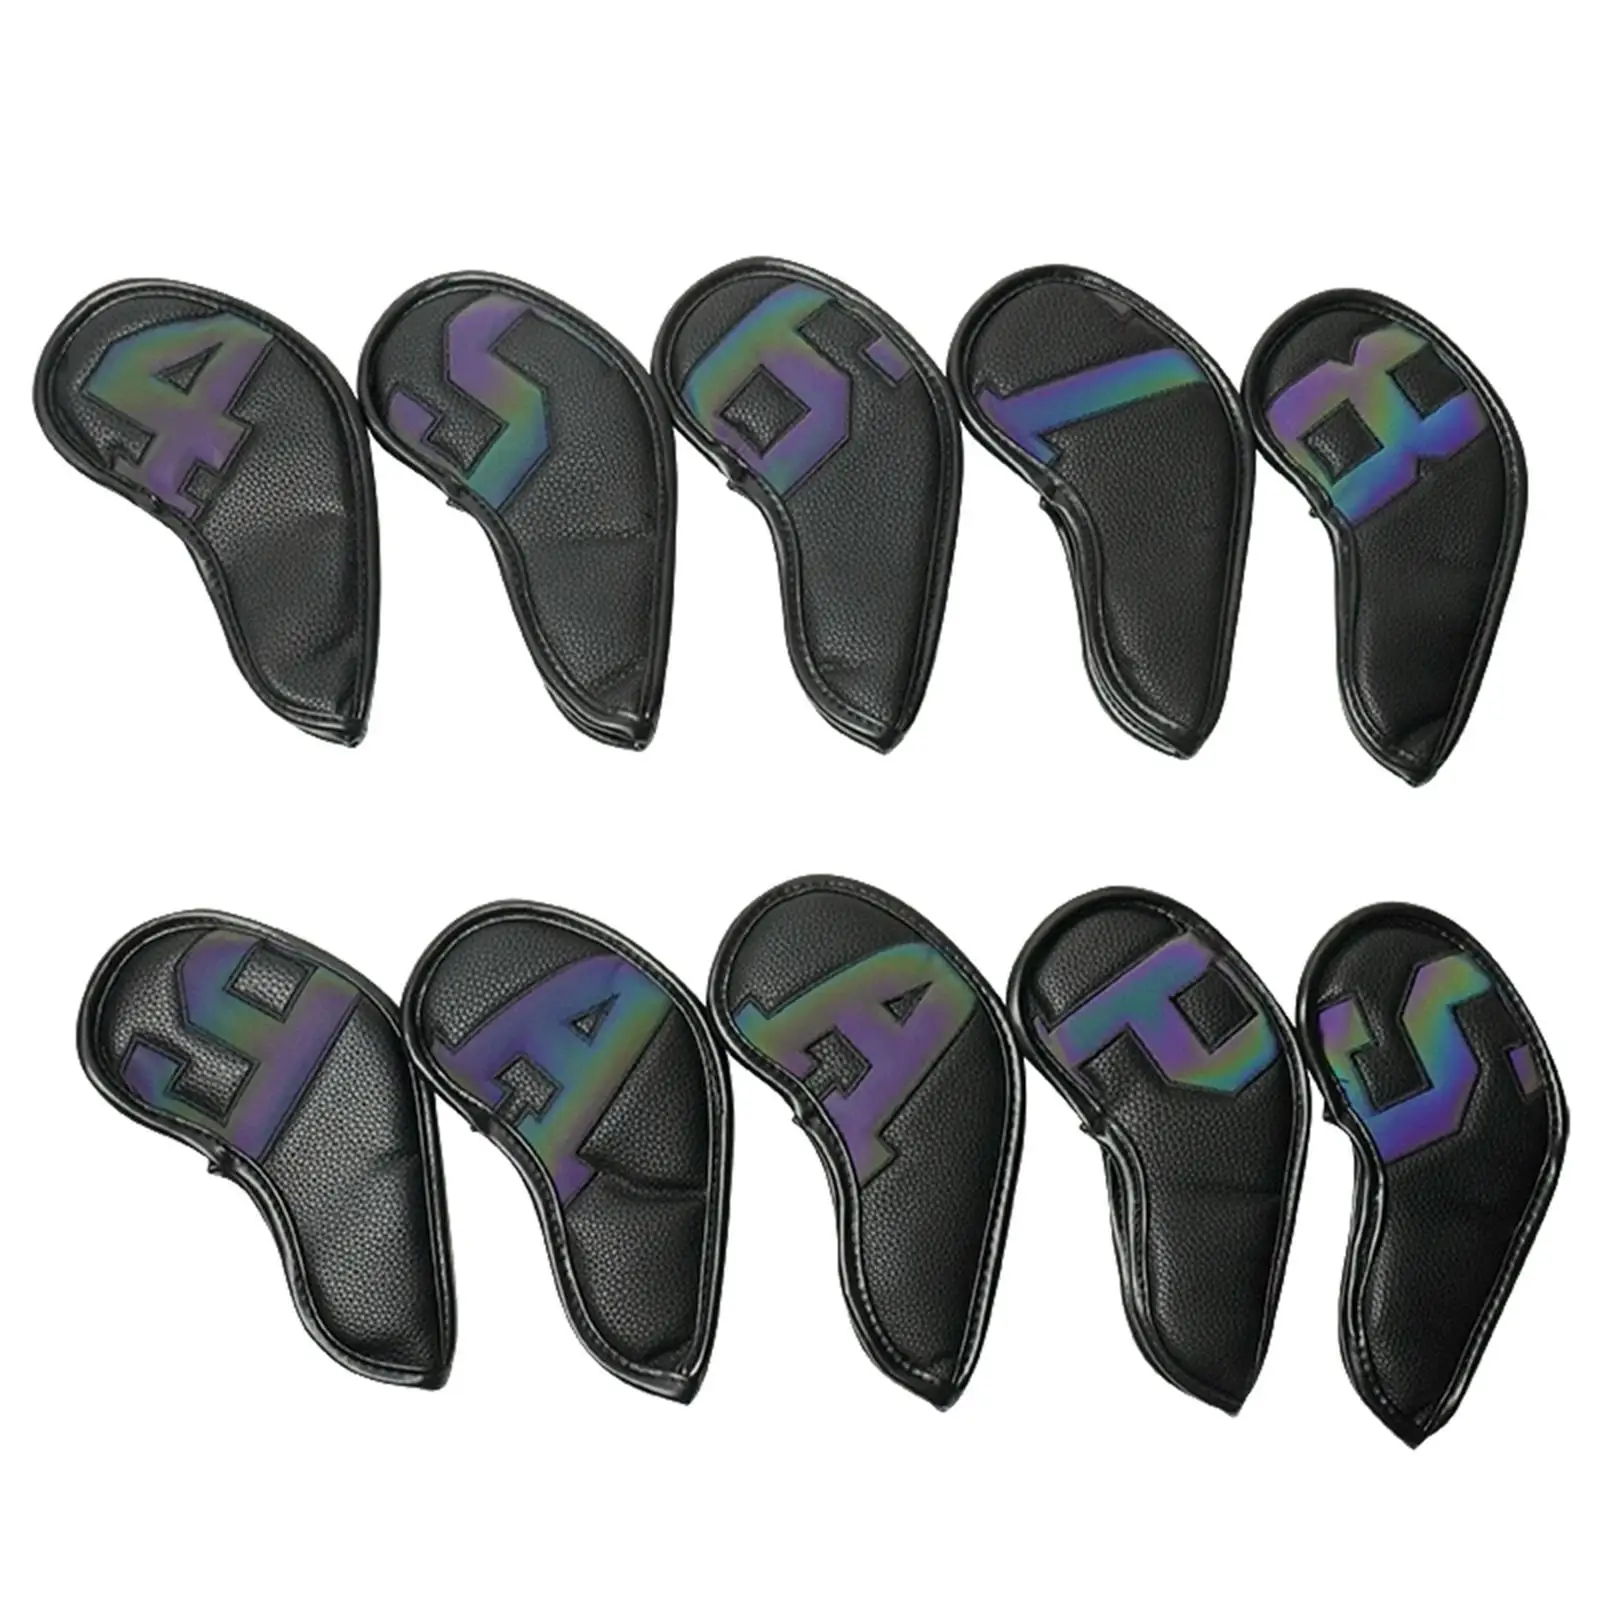 10Pcs Golf Iron Covers Set Water Resistant Wear Resistant Golf Club Headcover for Players Shaft Outdoor Sports Club Display